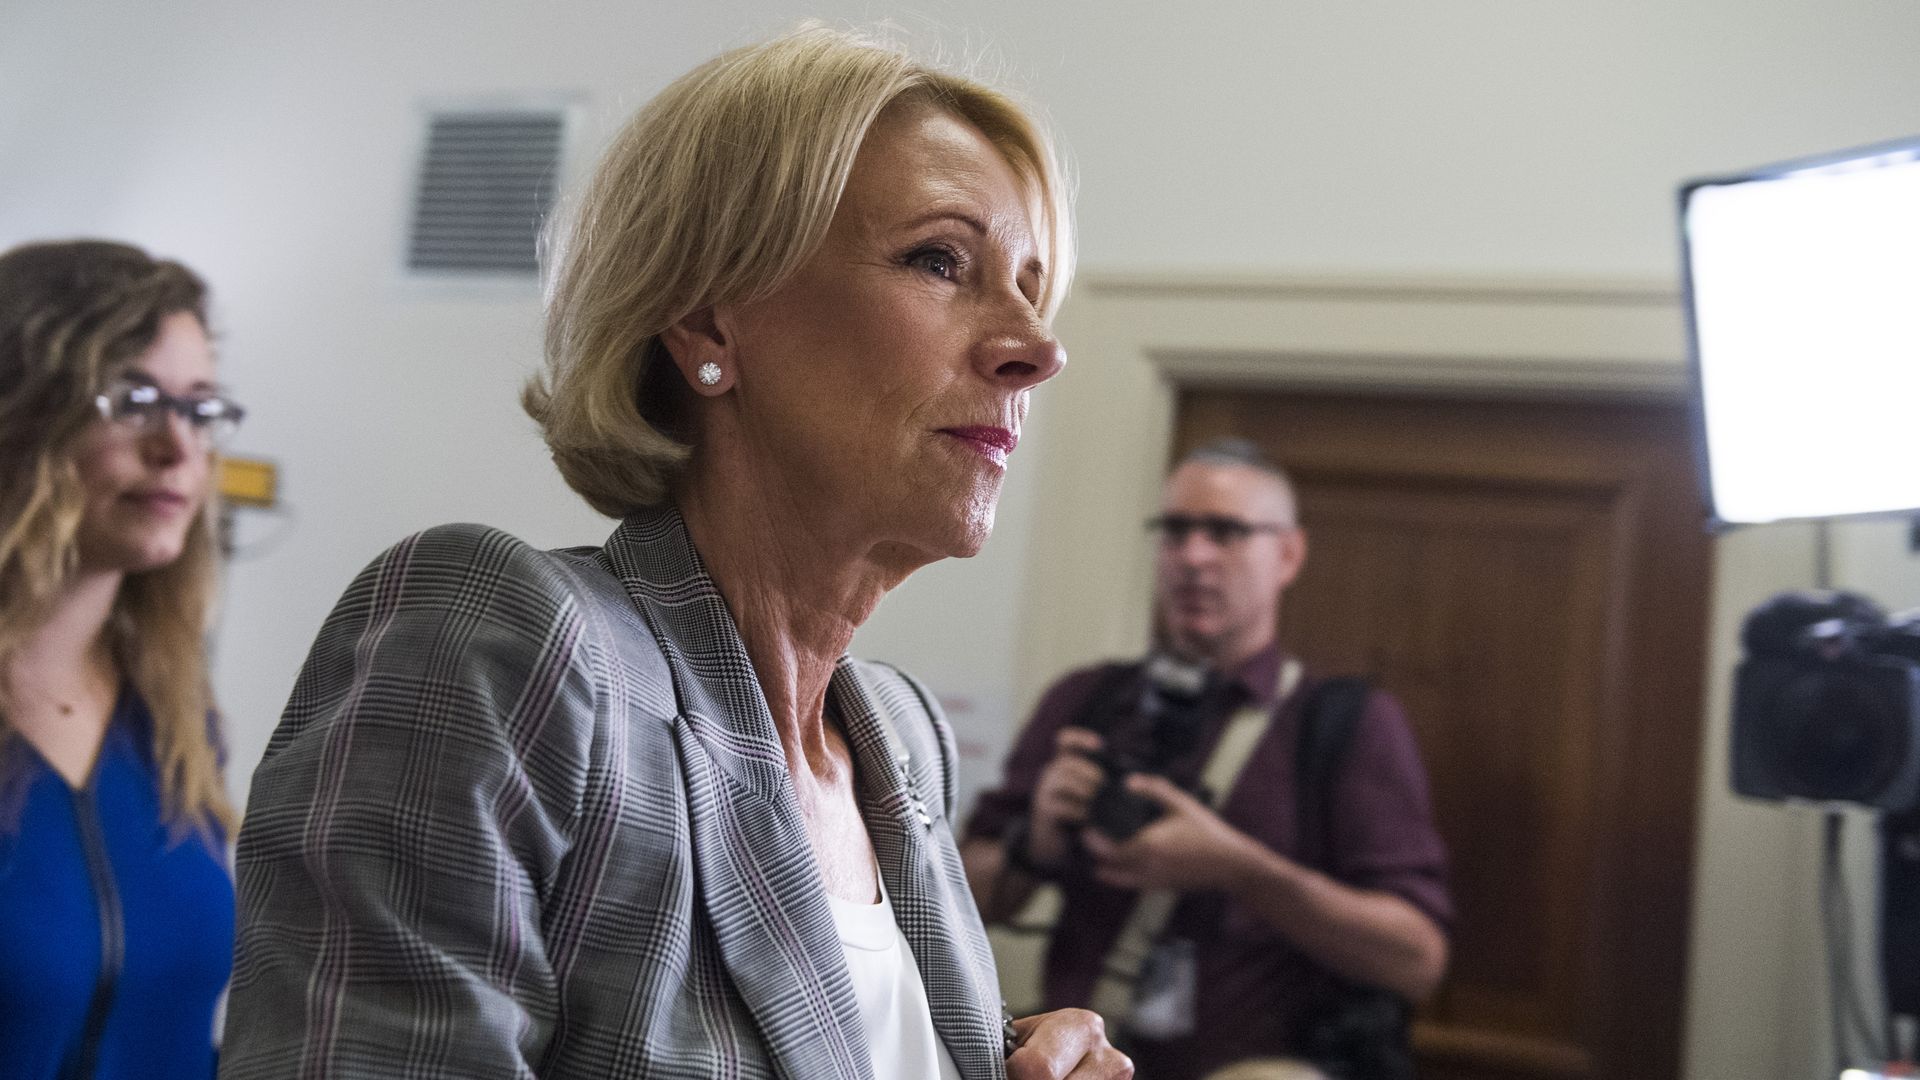 In this image, DeVos walks down a hallway with cameras and lights nearby.